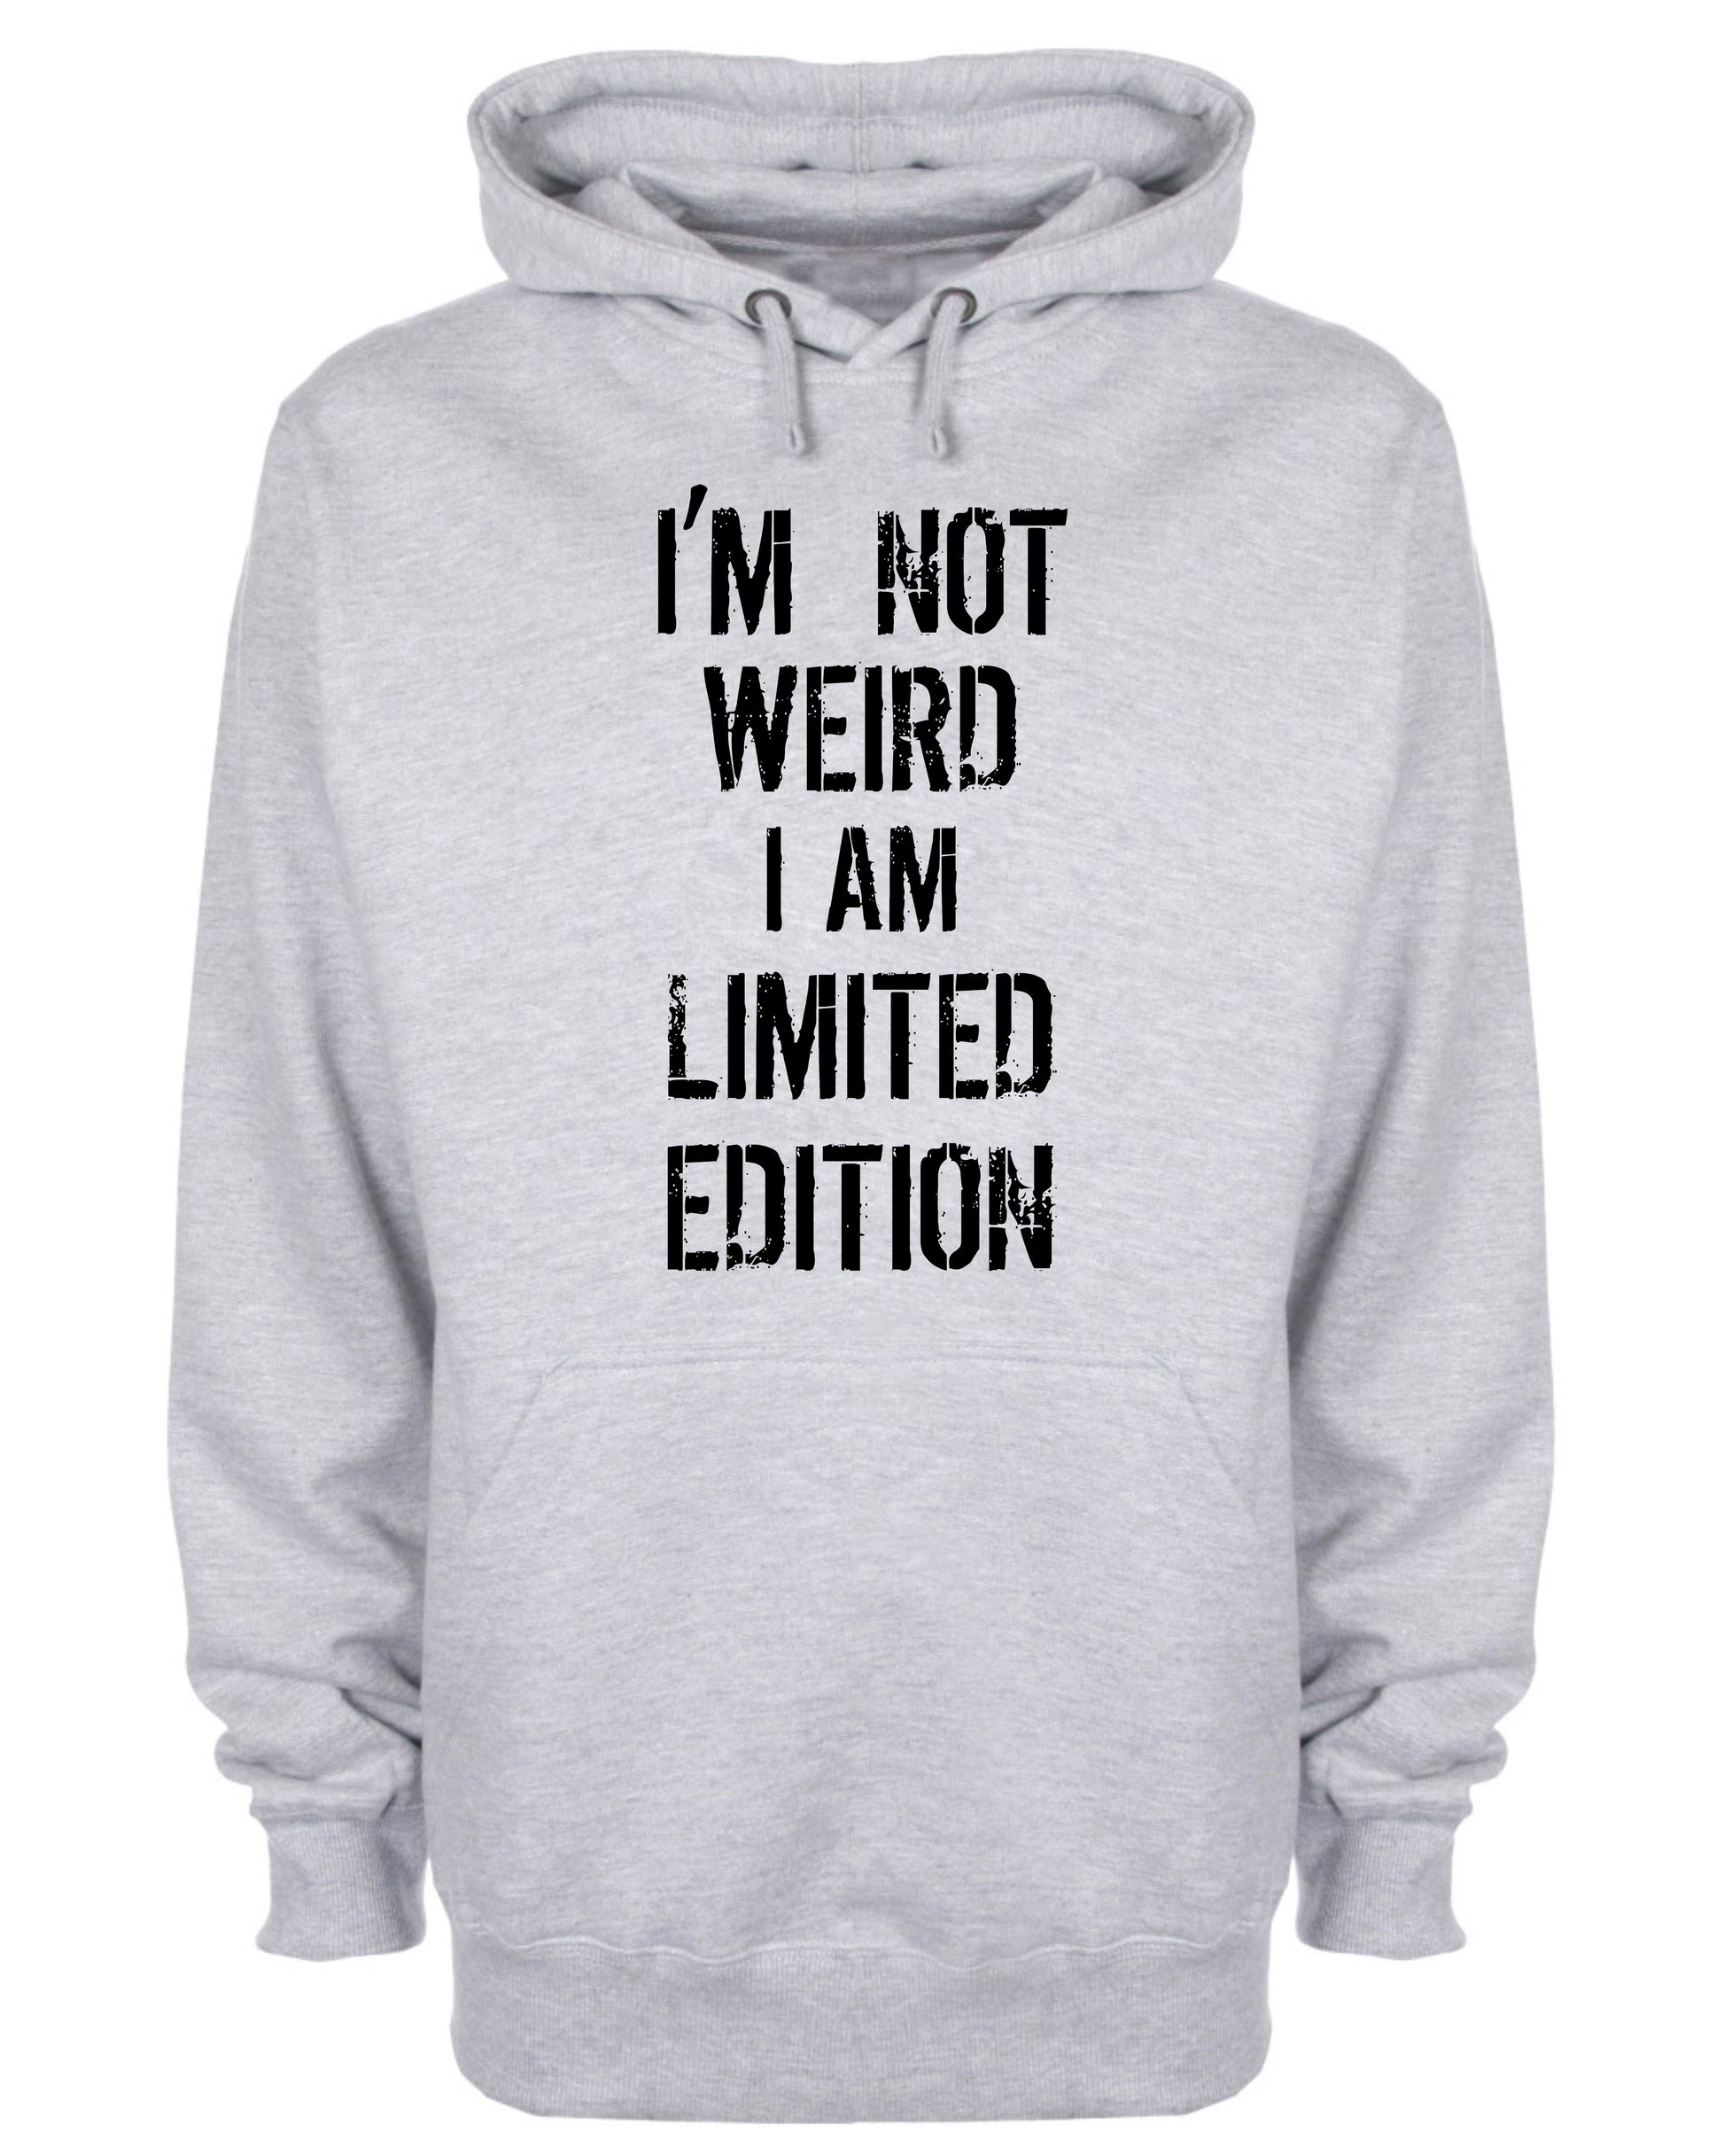 I'm Not Weird I Am Limited Edition Funny Hoodie